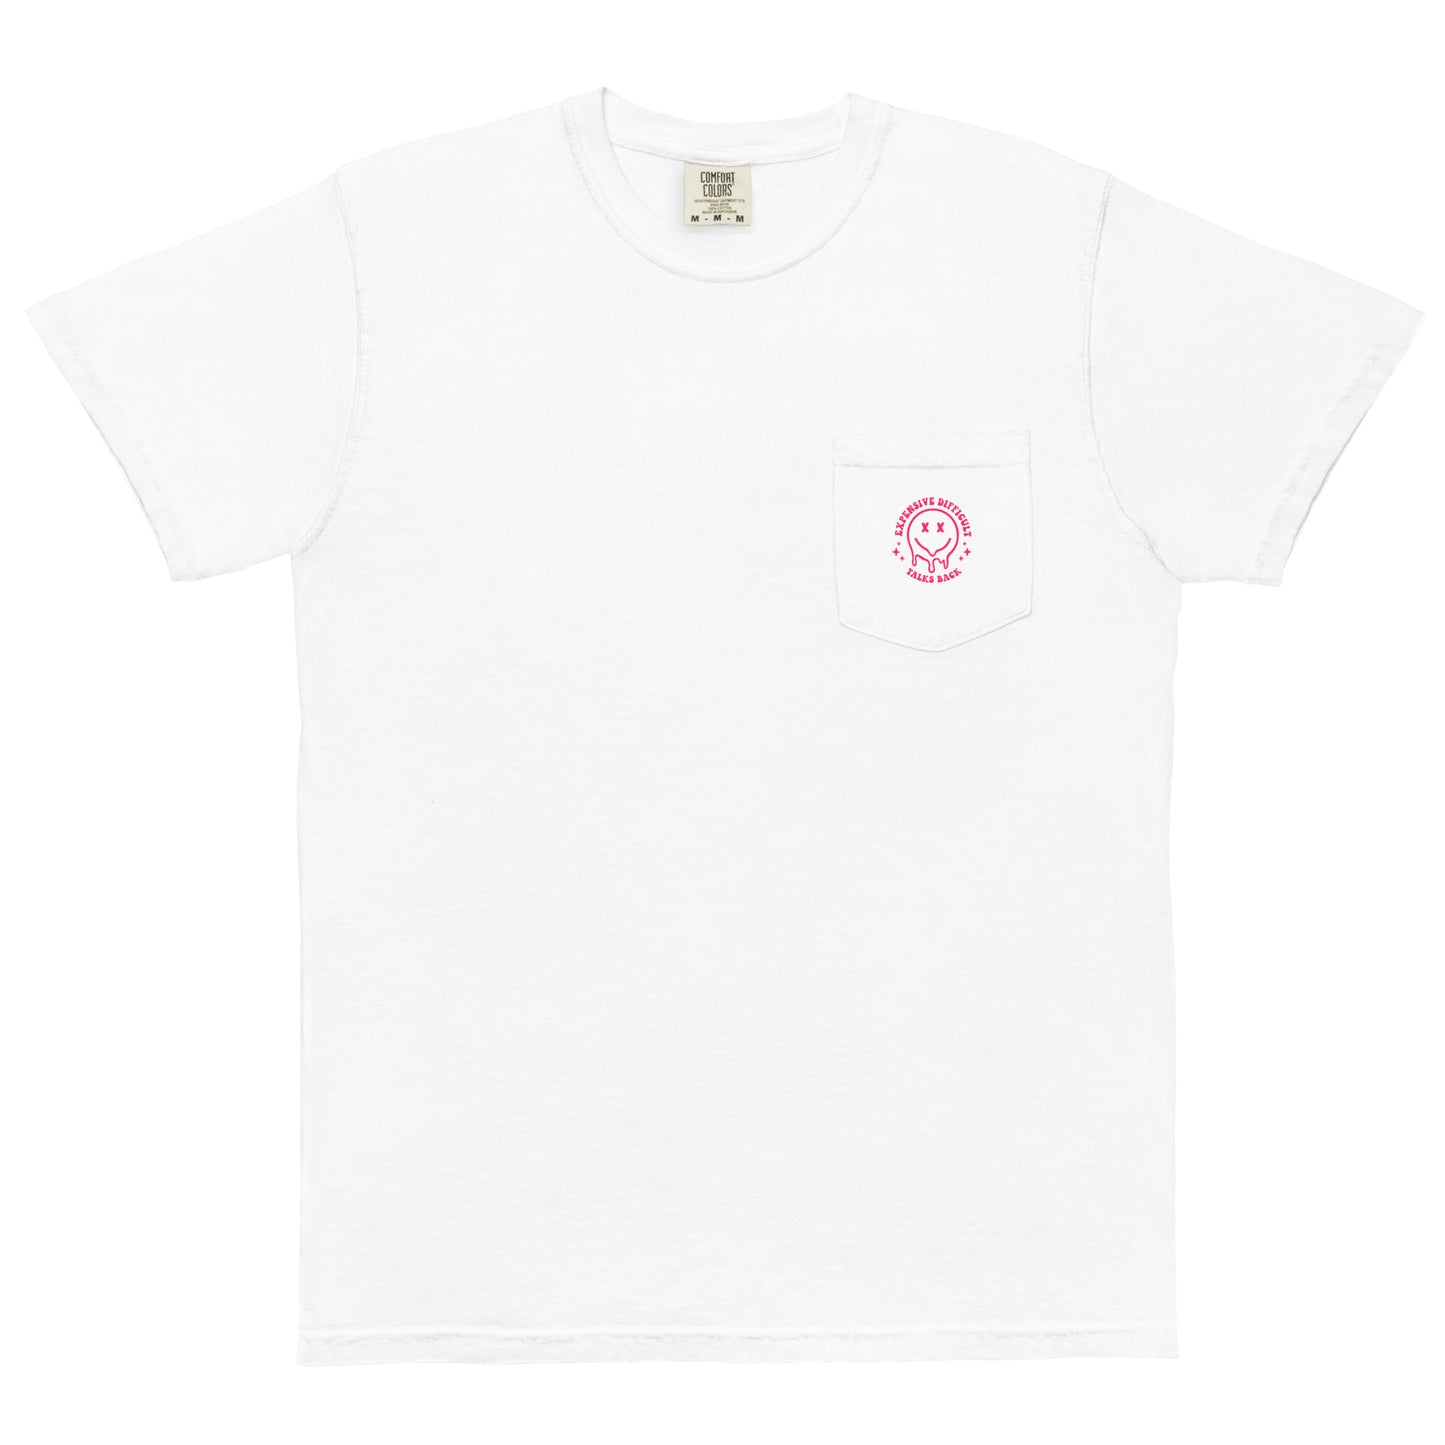 Expensive/Difficult Pocket Tee